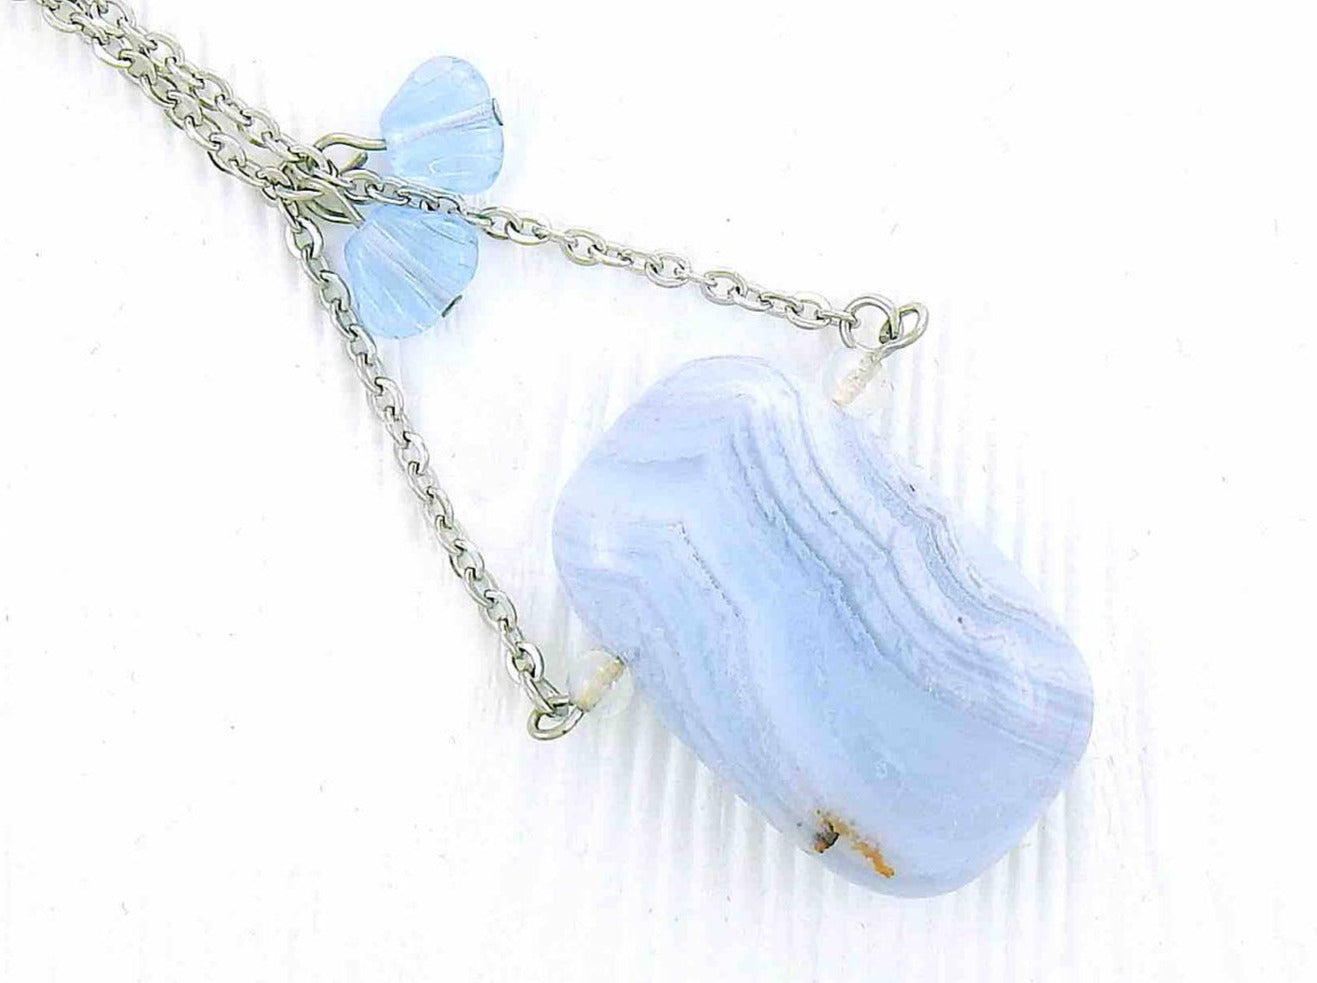 31-inch necklace with large rectangular blue lace agate stone pendant in triangular layout, matching glass beads, stainless steel chain